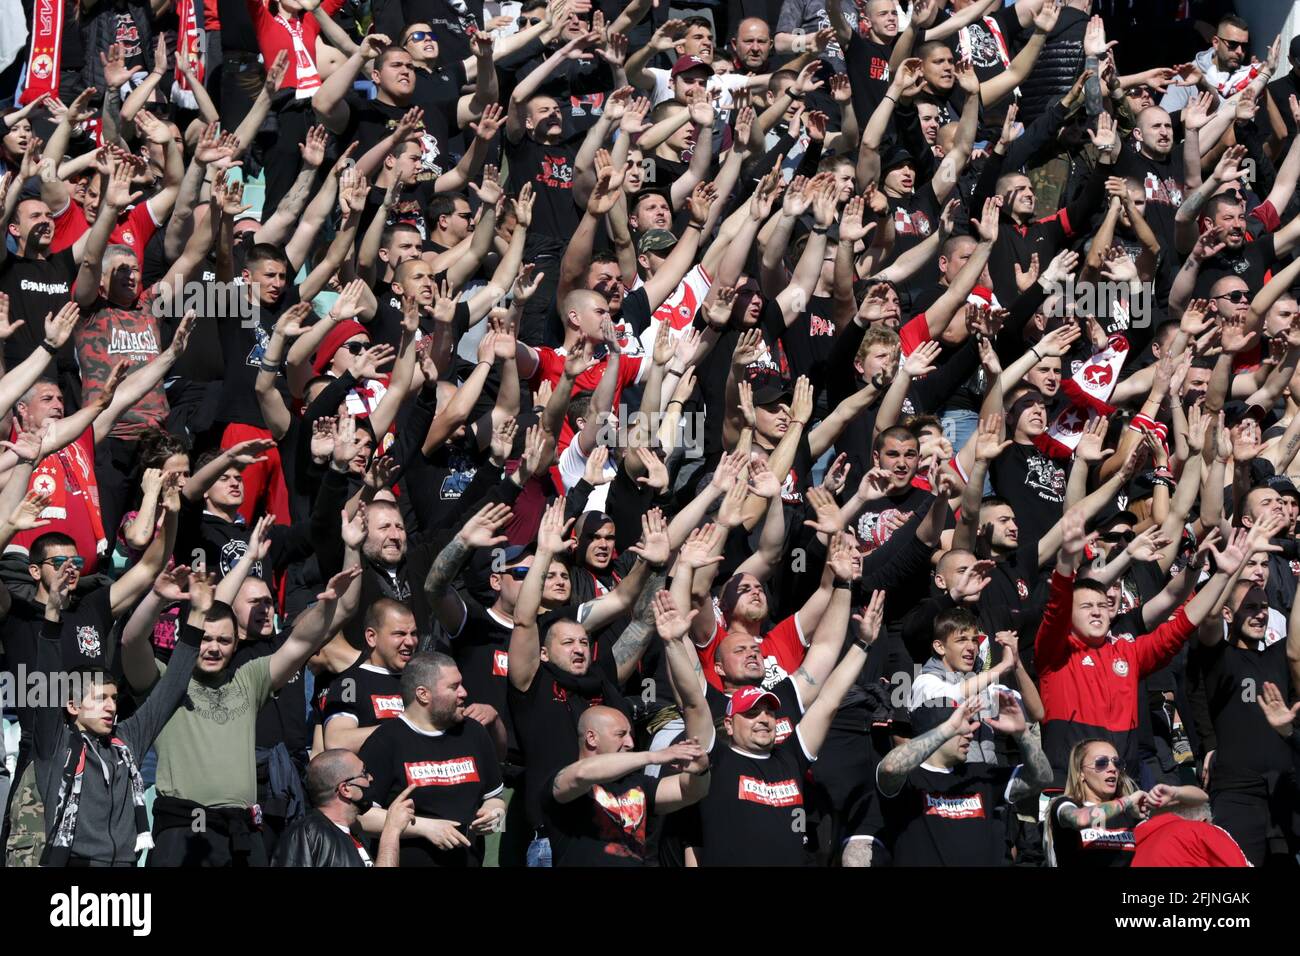 Sofia, Bulgaria: 25 April, 2021: CSKA Sofia's supporters cheer their team during the national championship football match between Levski and CSKA Sofia. Football fans have been allowed to attend the stadium with less than 30% of the seats amidst the coronavirus pandemic. Credit: Pluto/Alamy Live News Stock Photo